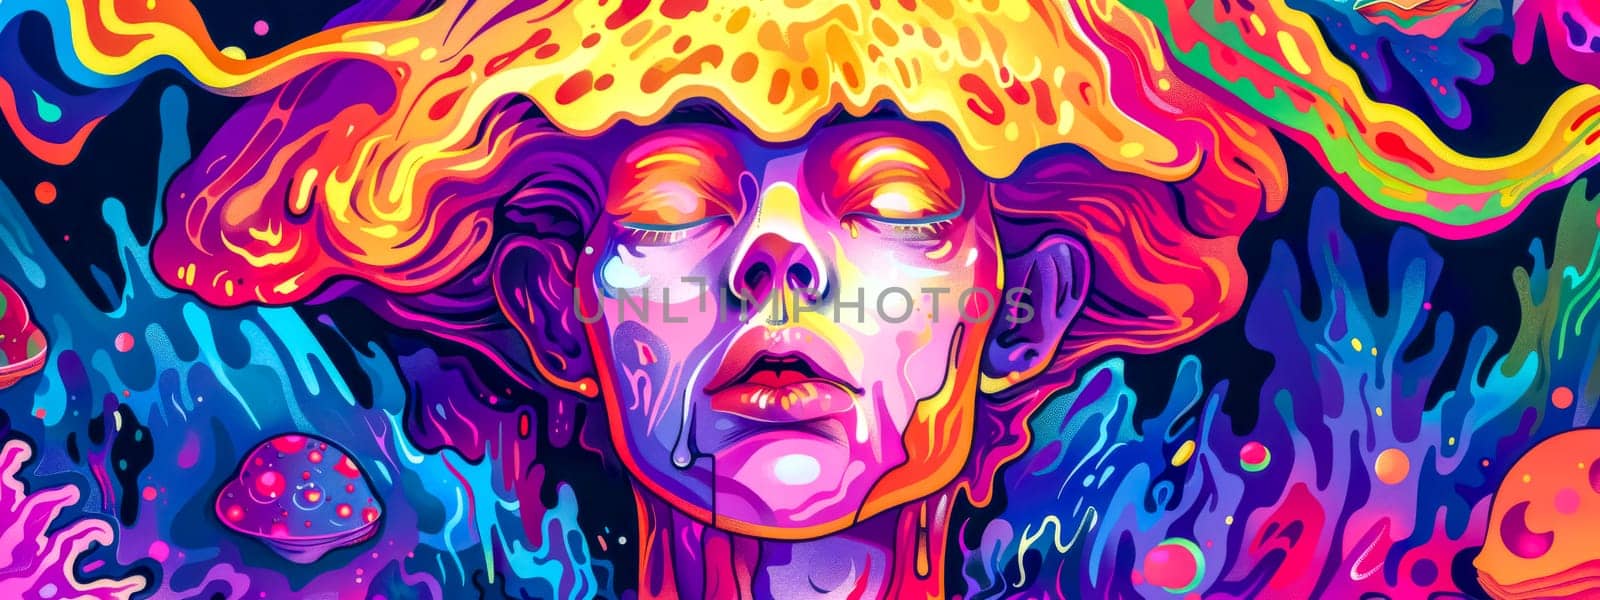 Vibrant digital artwork of a person in a surreal, colorful mushroom fantasy by Edophoto